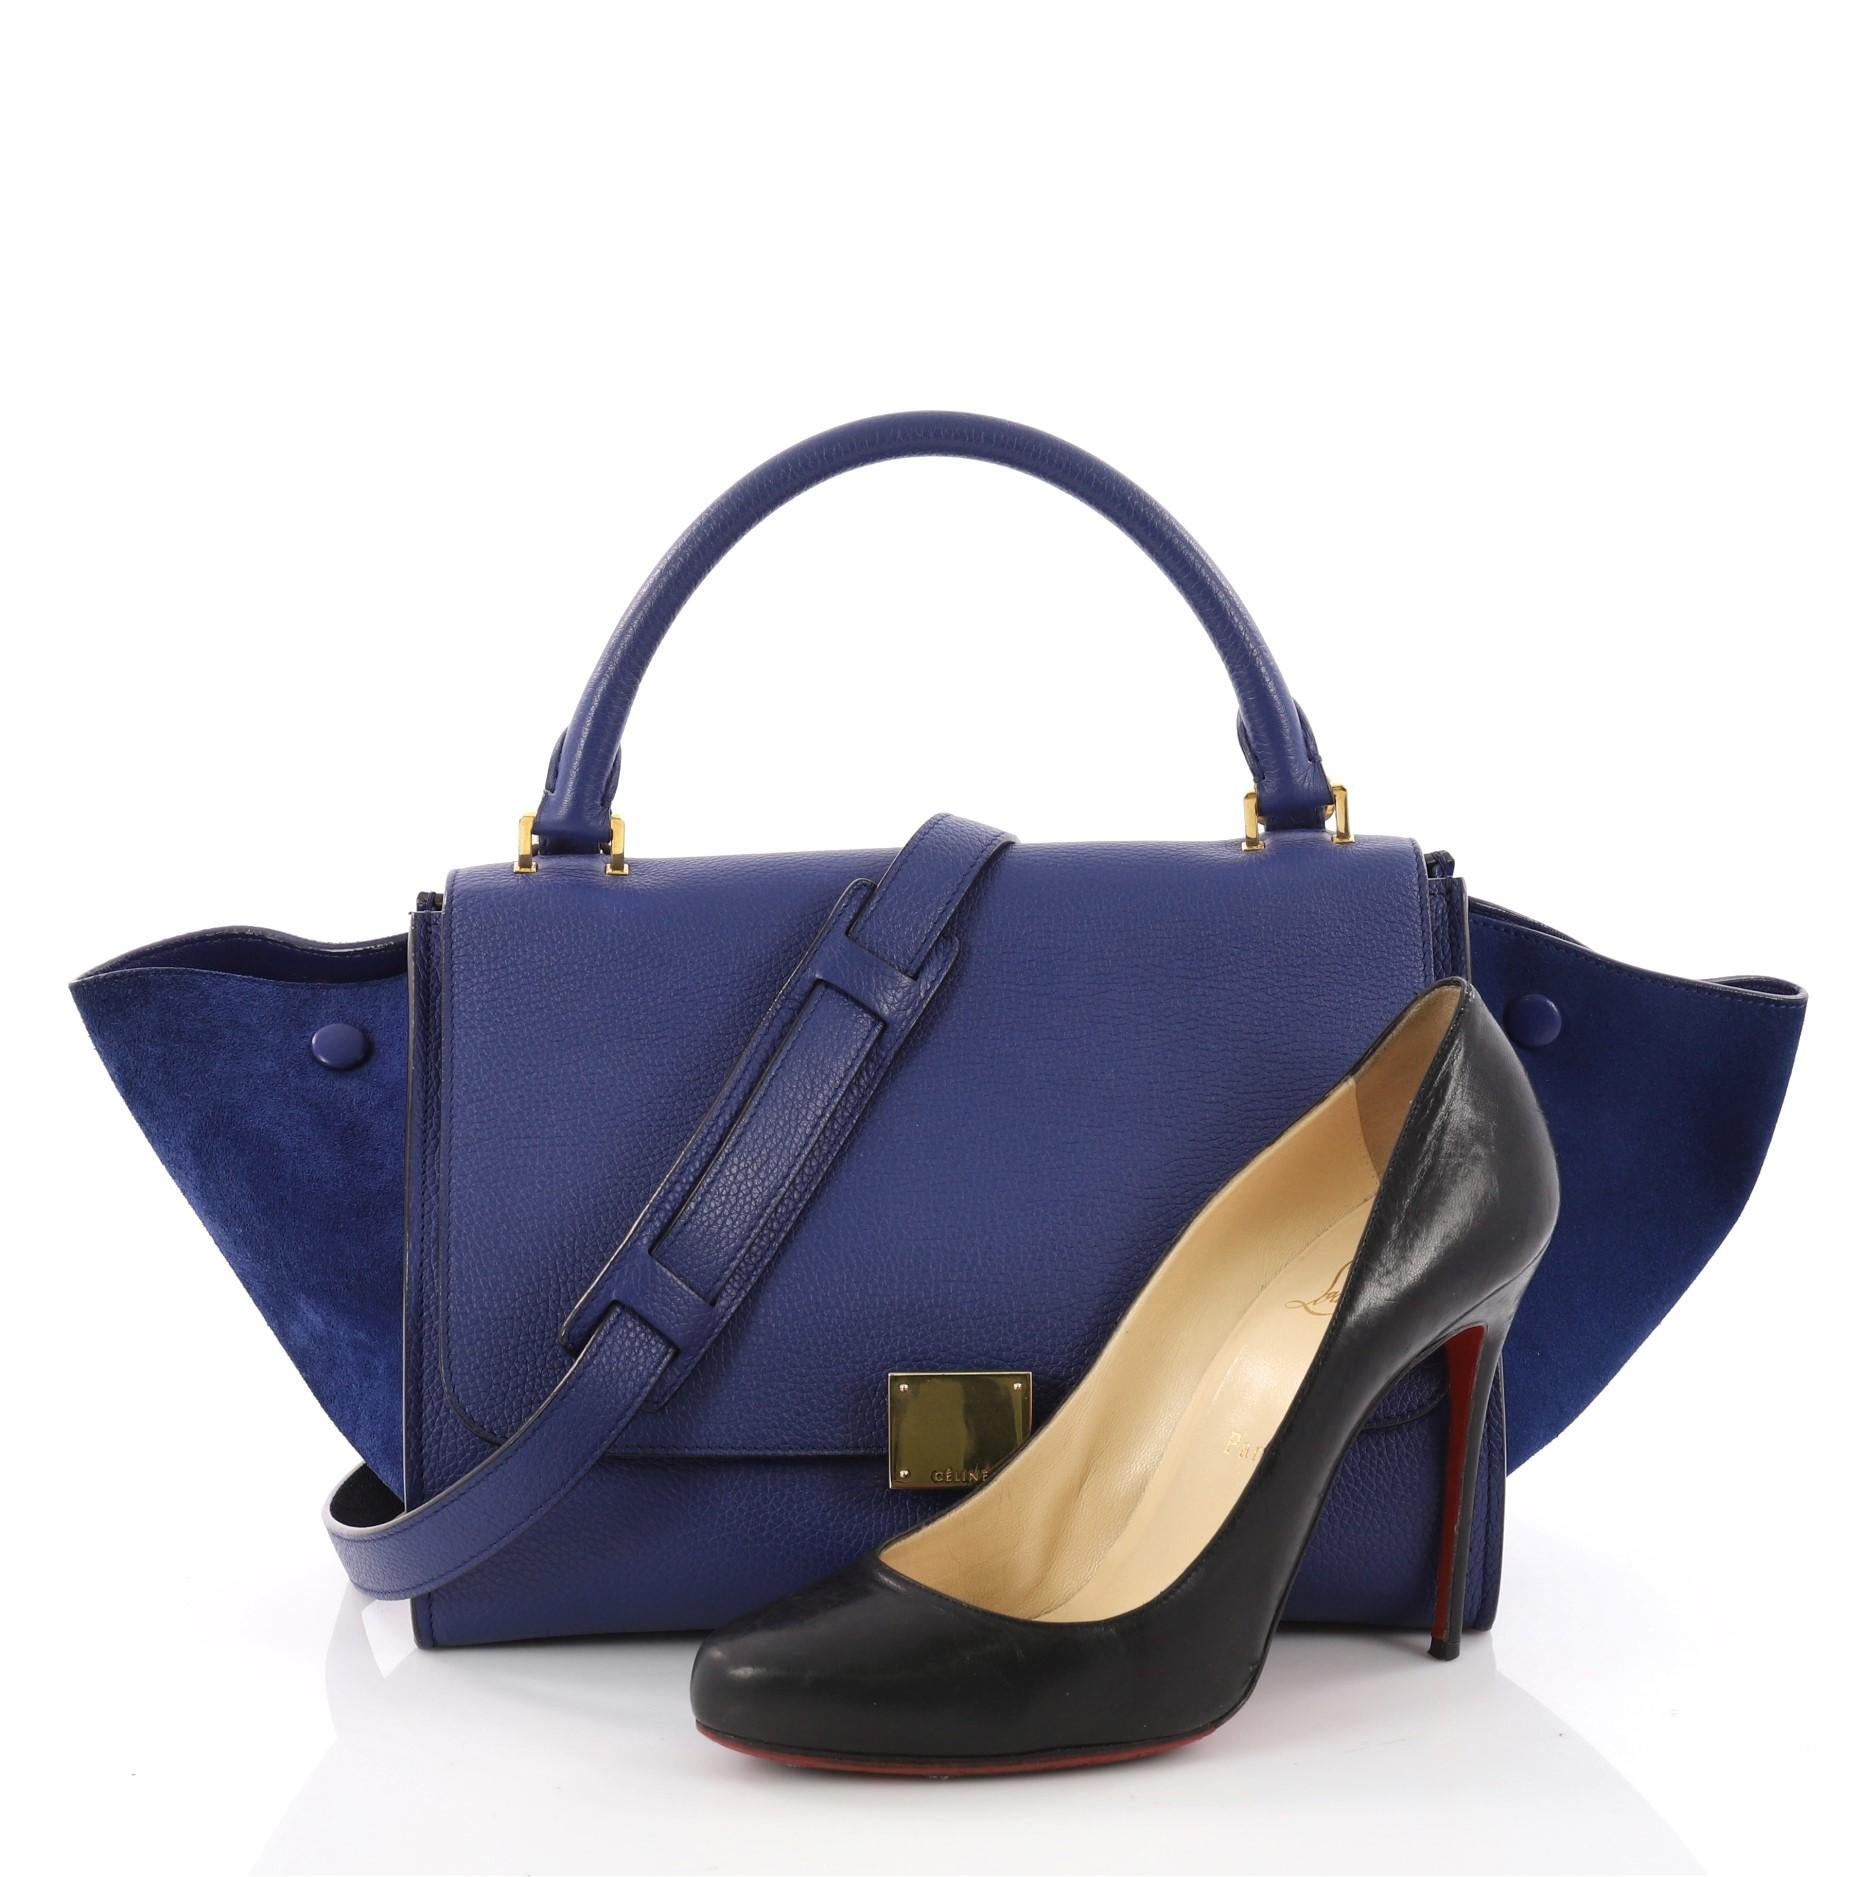 This authentic Celine Trapeze Handbag Leather Small is modern and minimalist in design. Crafted from blue leather and suede wings, this popular bag features exterior back zip pocket, side snap closures, top looped handle and gold-tone hardware